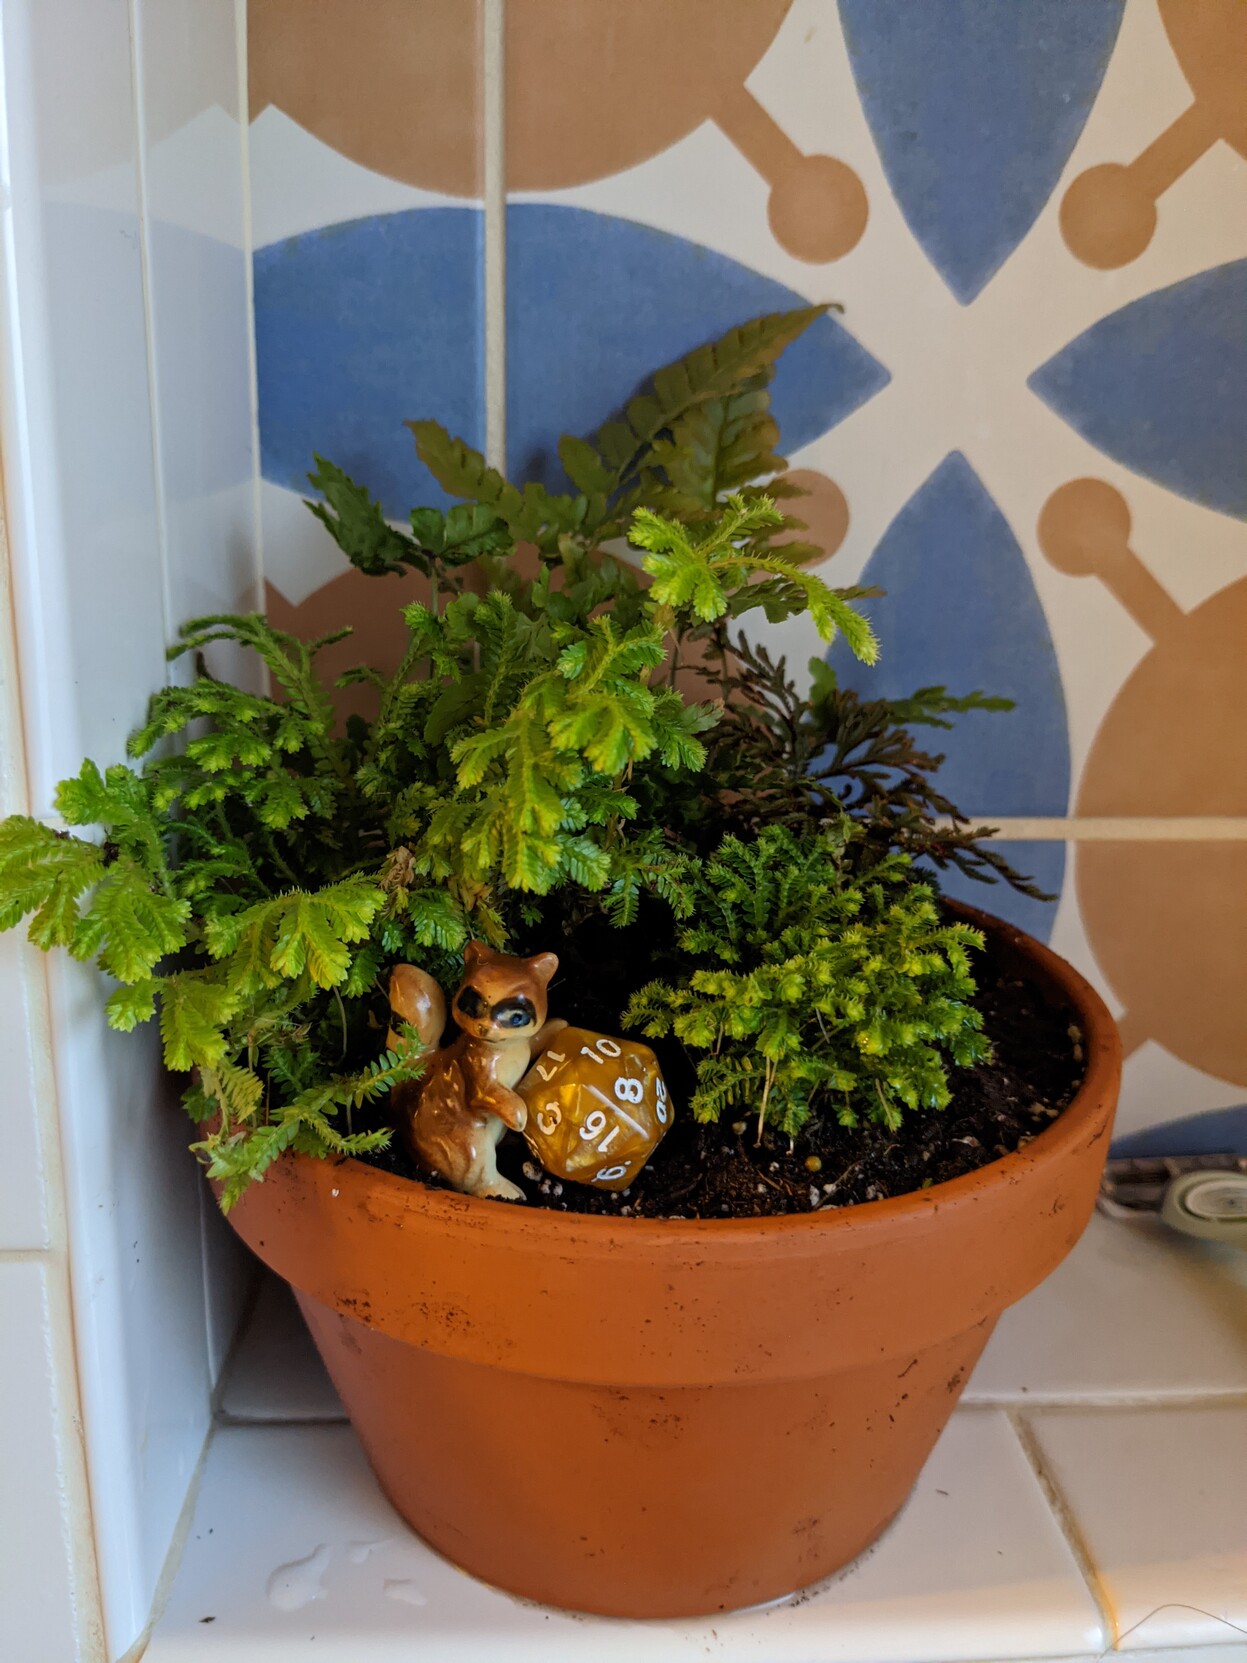 A small, stout terracotta pot containing a fern in the rear and a few moss varieties in the midground of the pot.  In the foregground there is a raccoon figurine holding a d20.  The pot is in a tiled alcove.